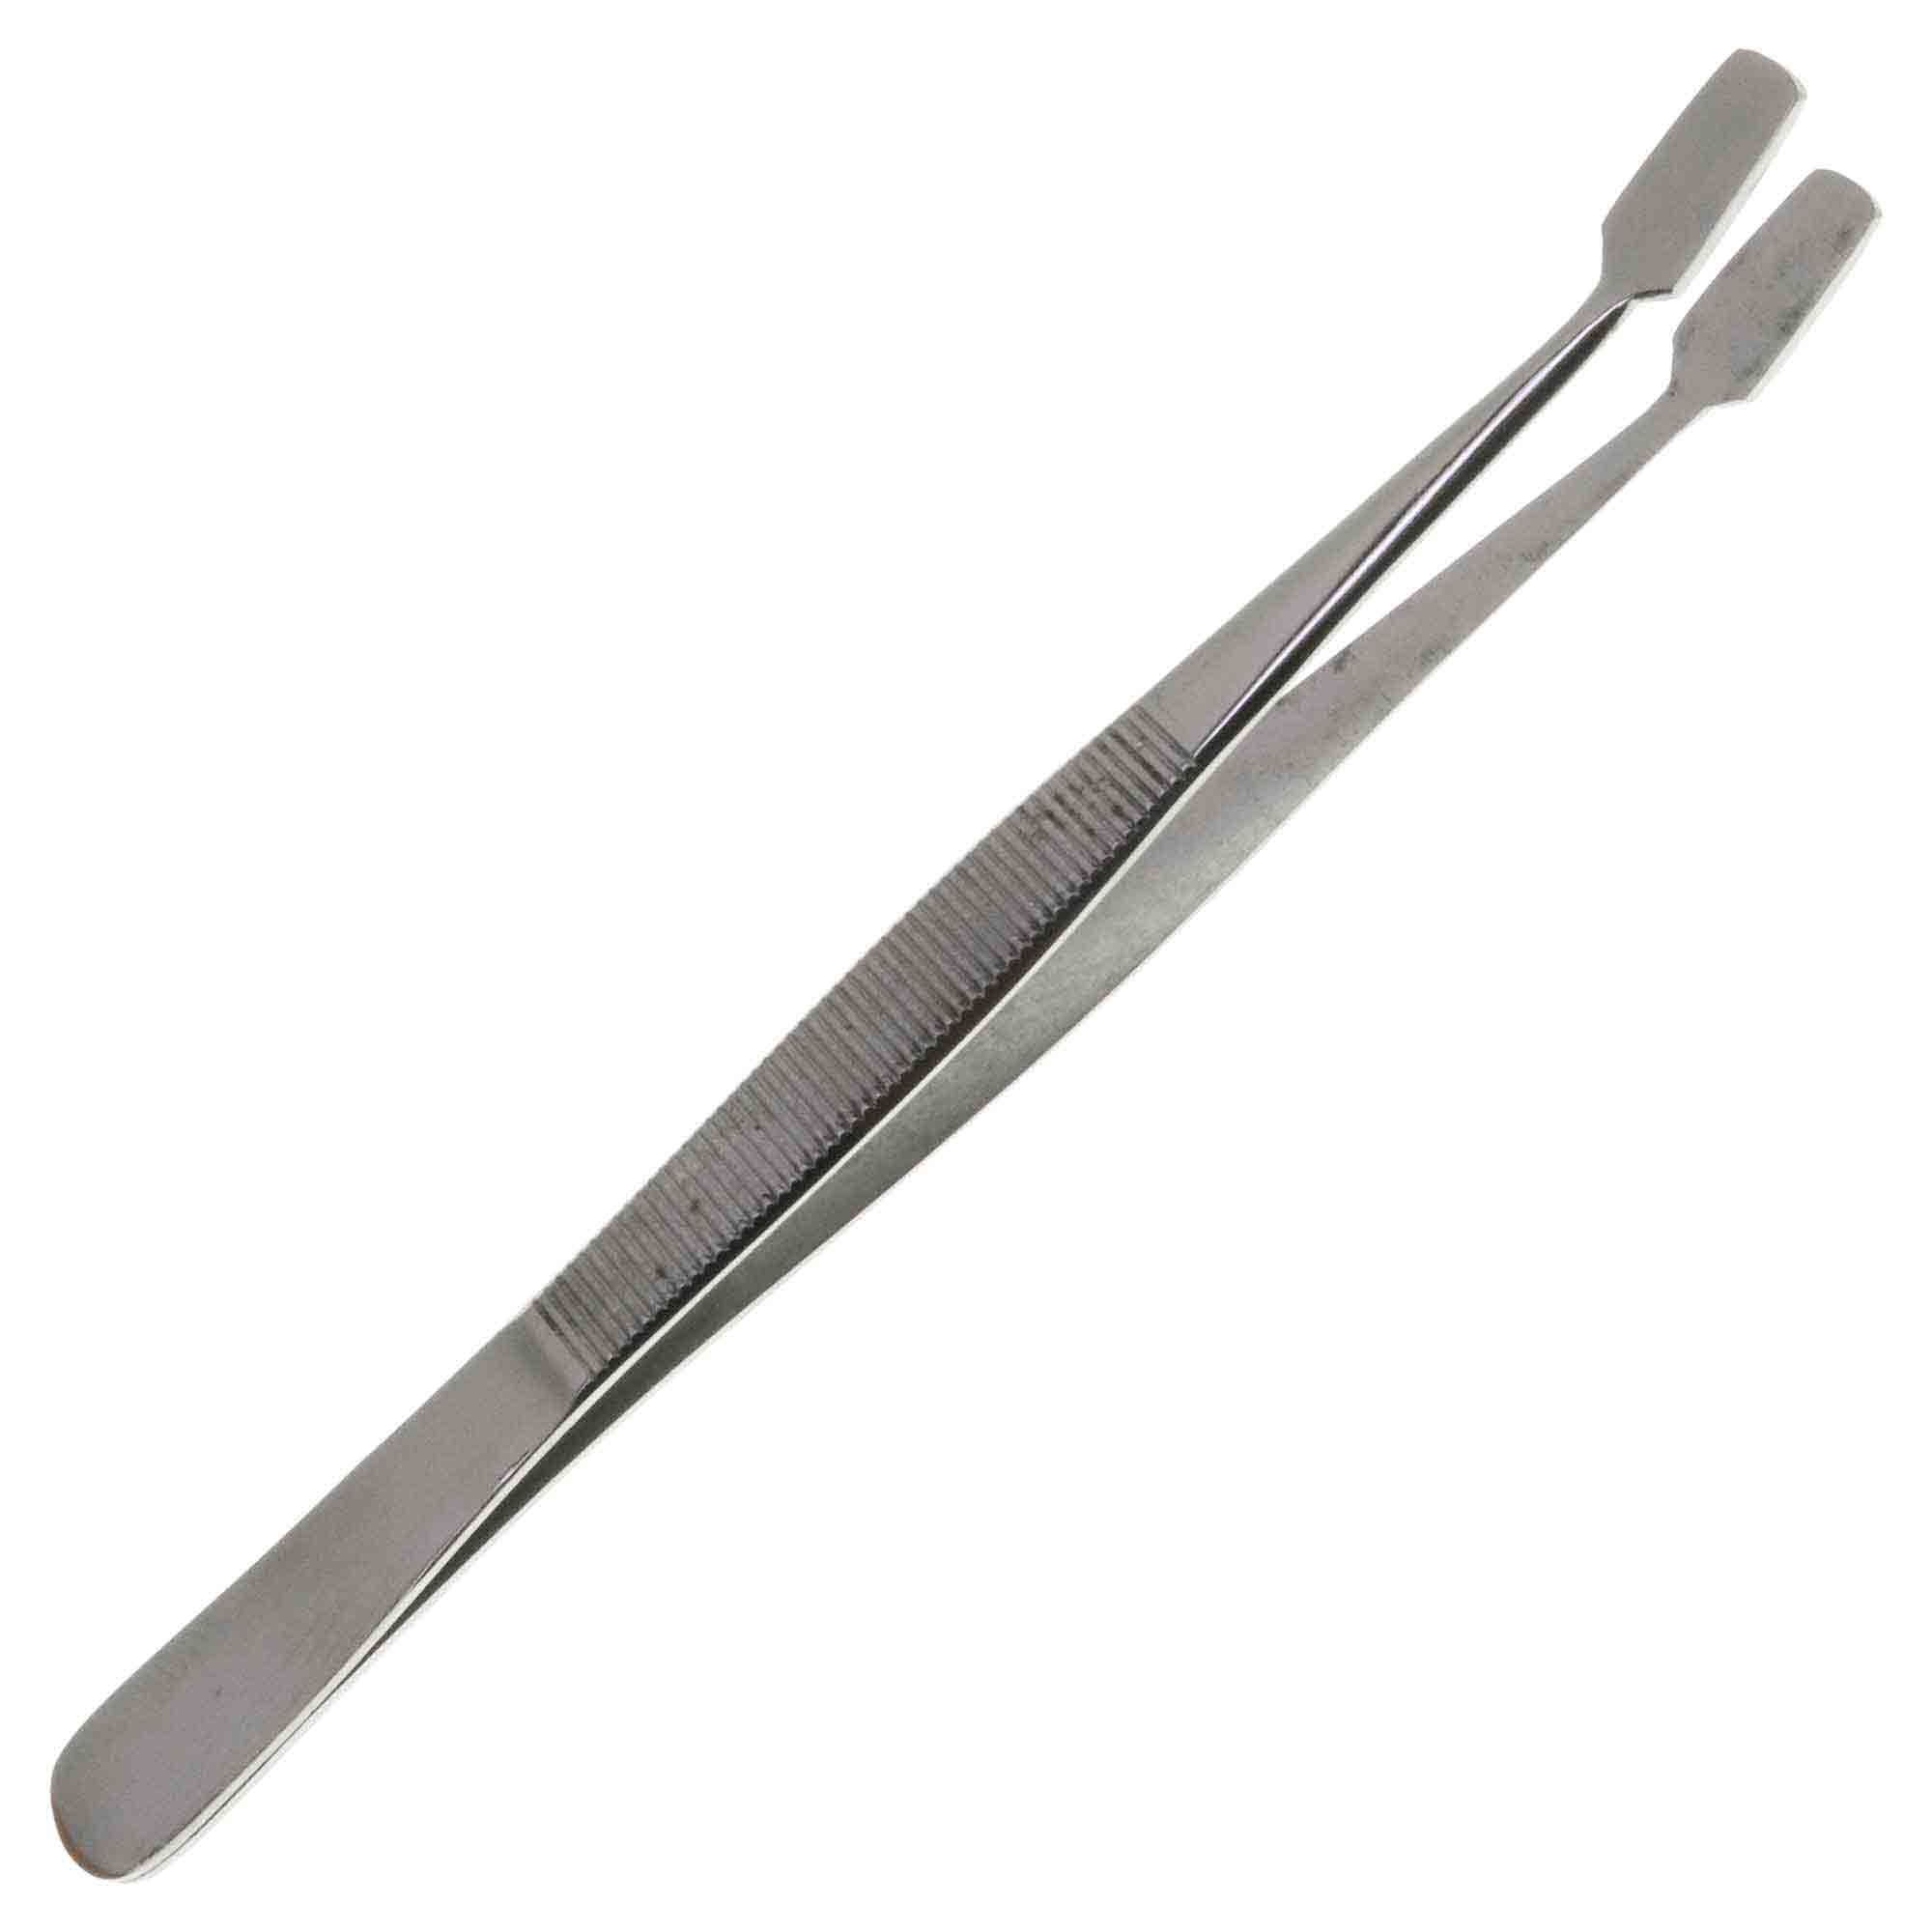 4 3/4 inch Stamp/Paddle Tweezer Curved